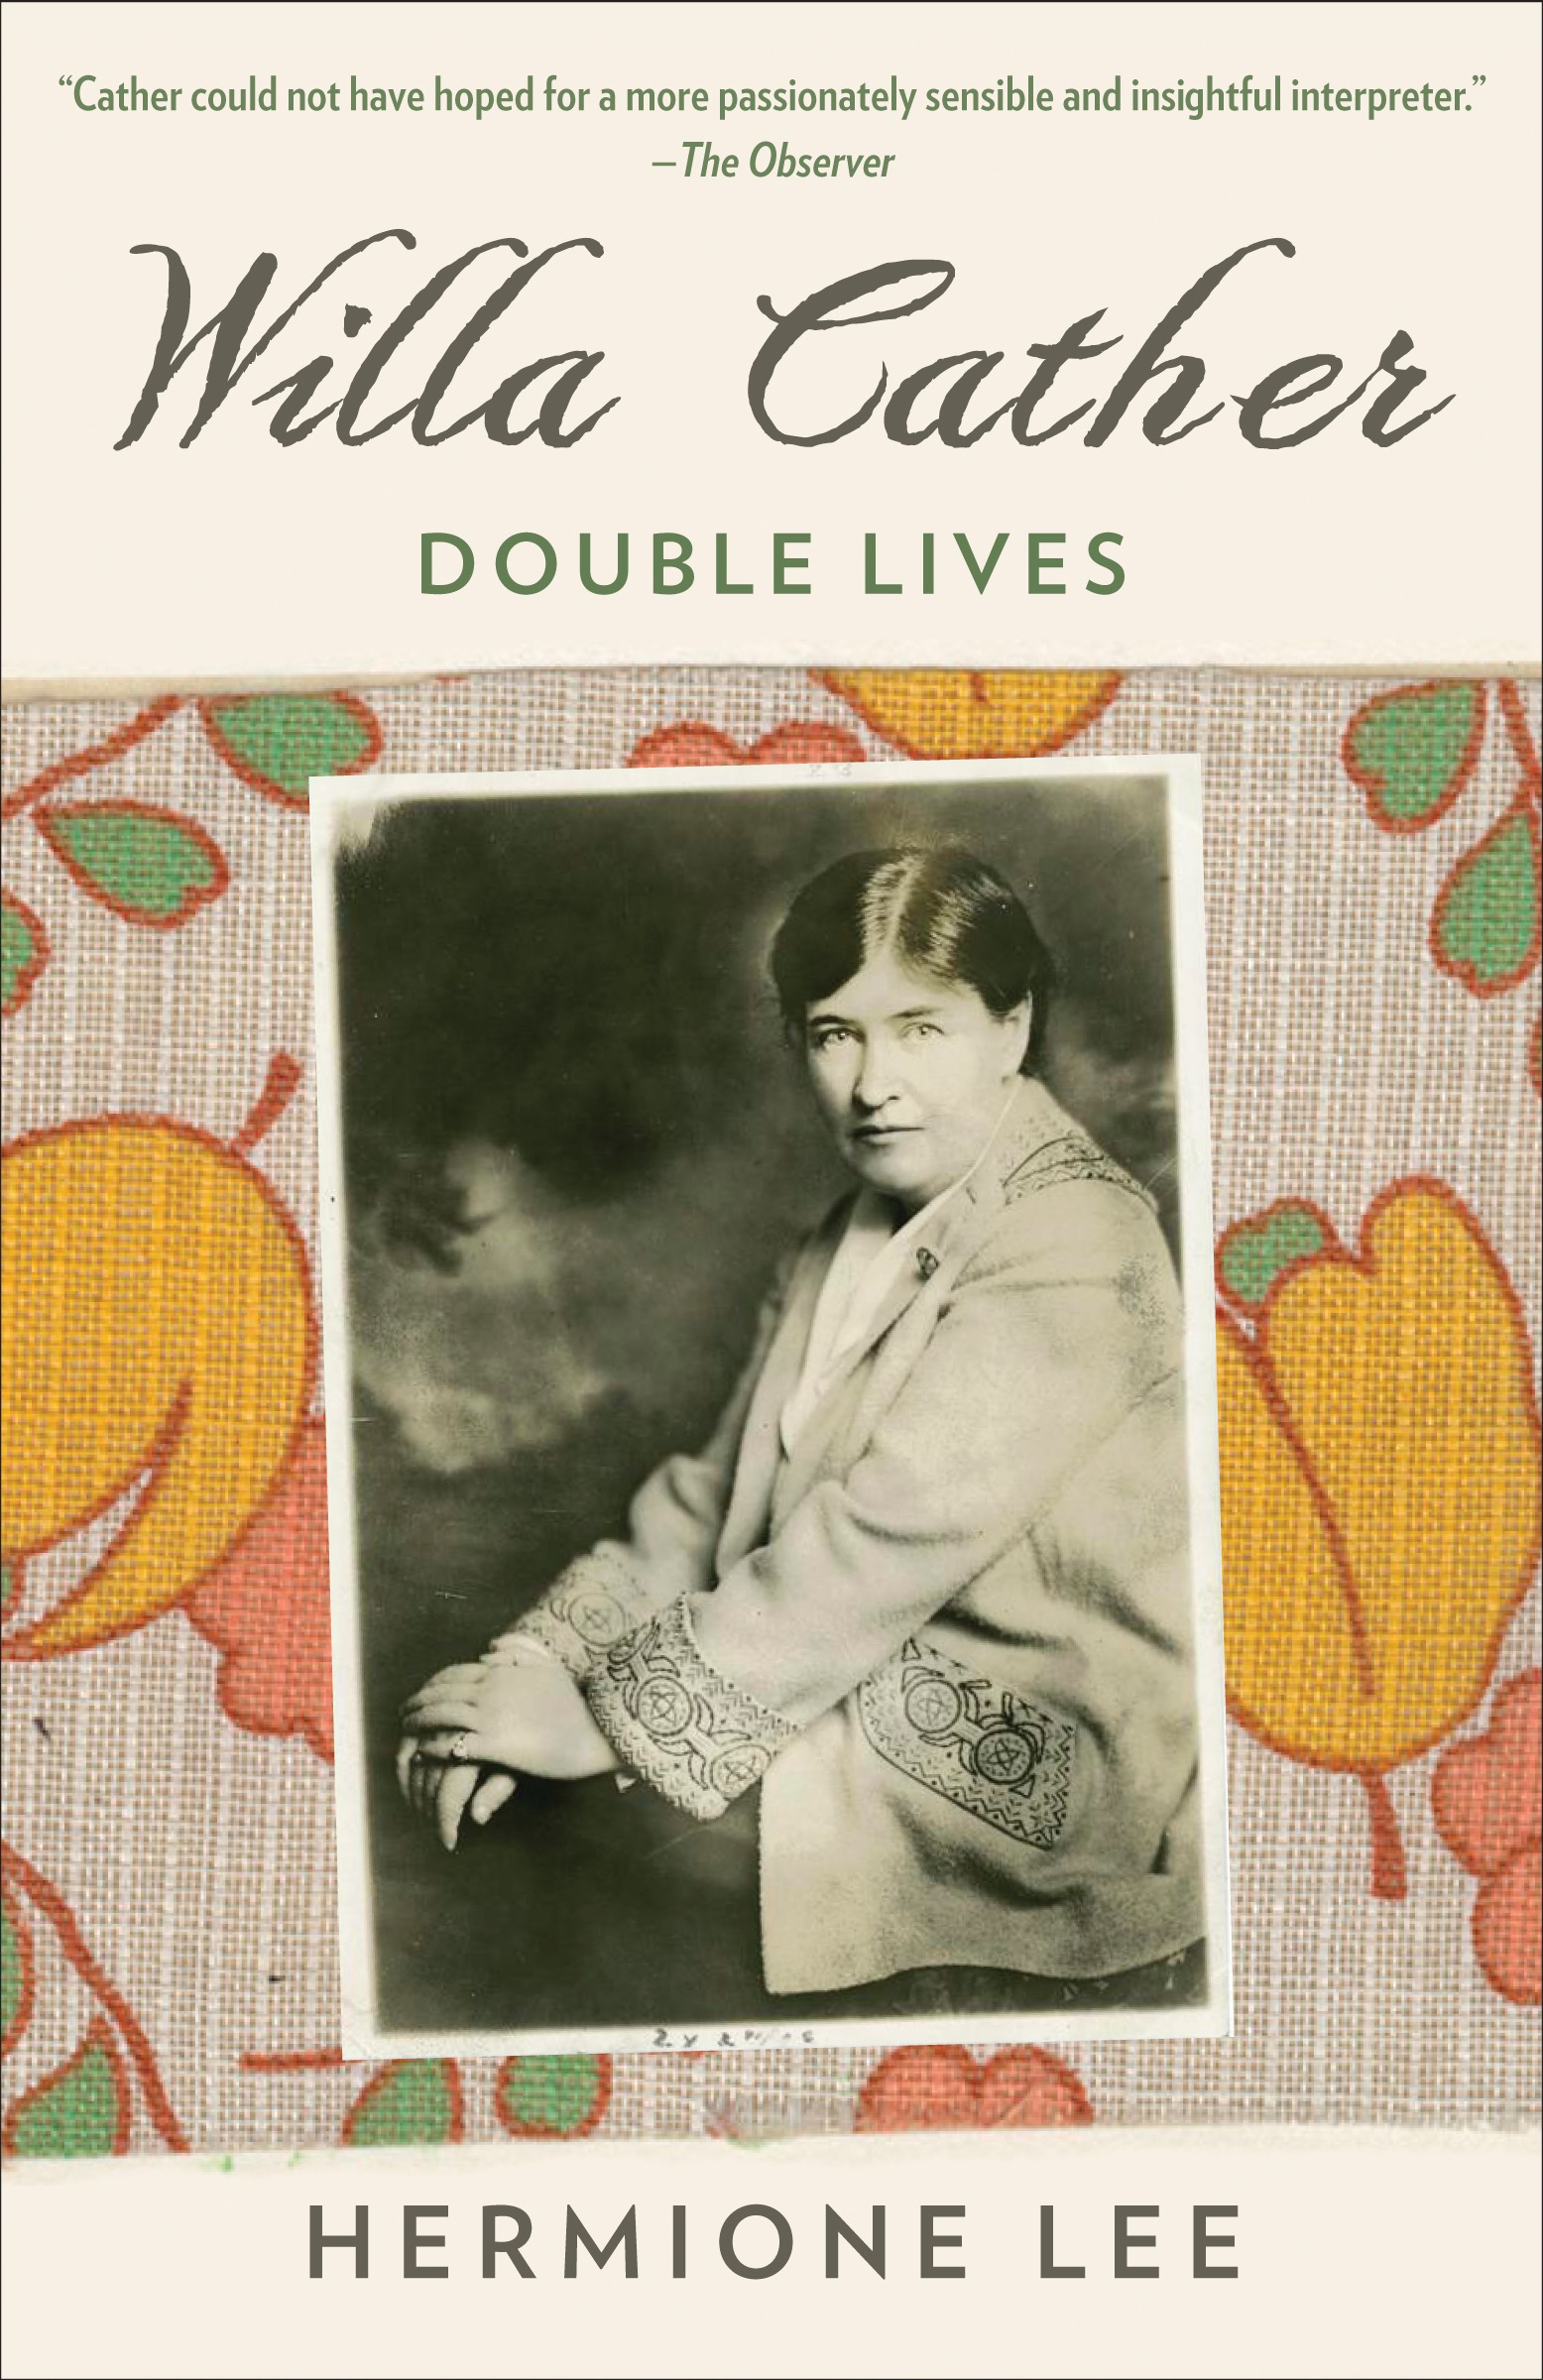 Willa Cather by Hermione Lee, Published by Vintage 2017